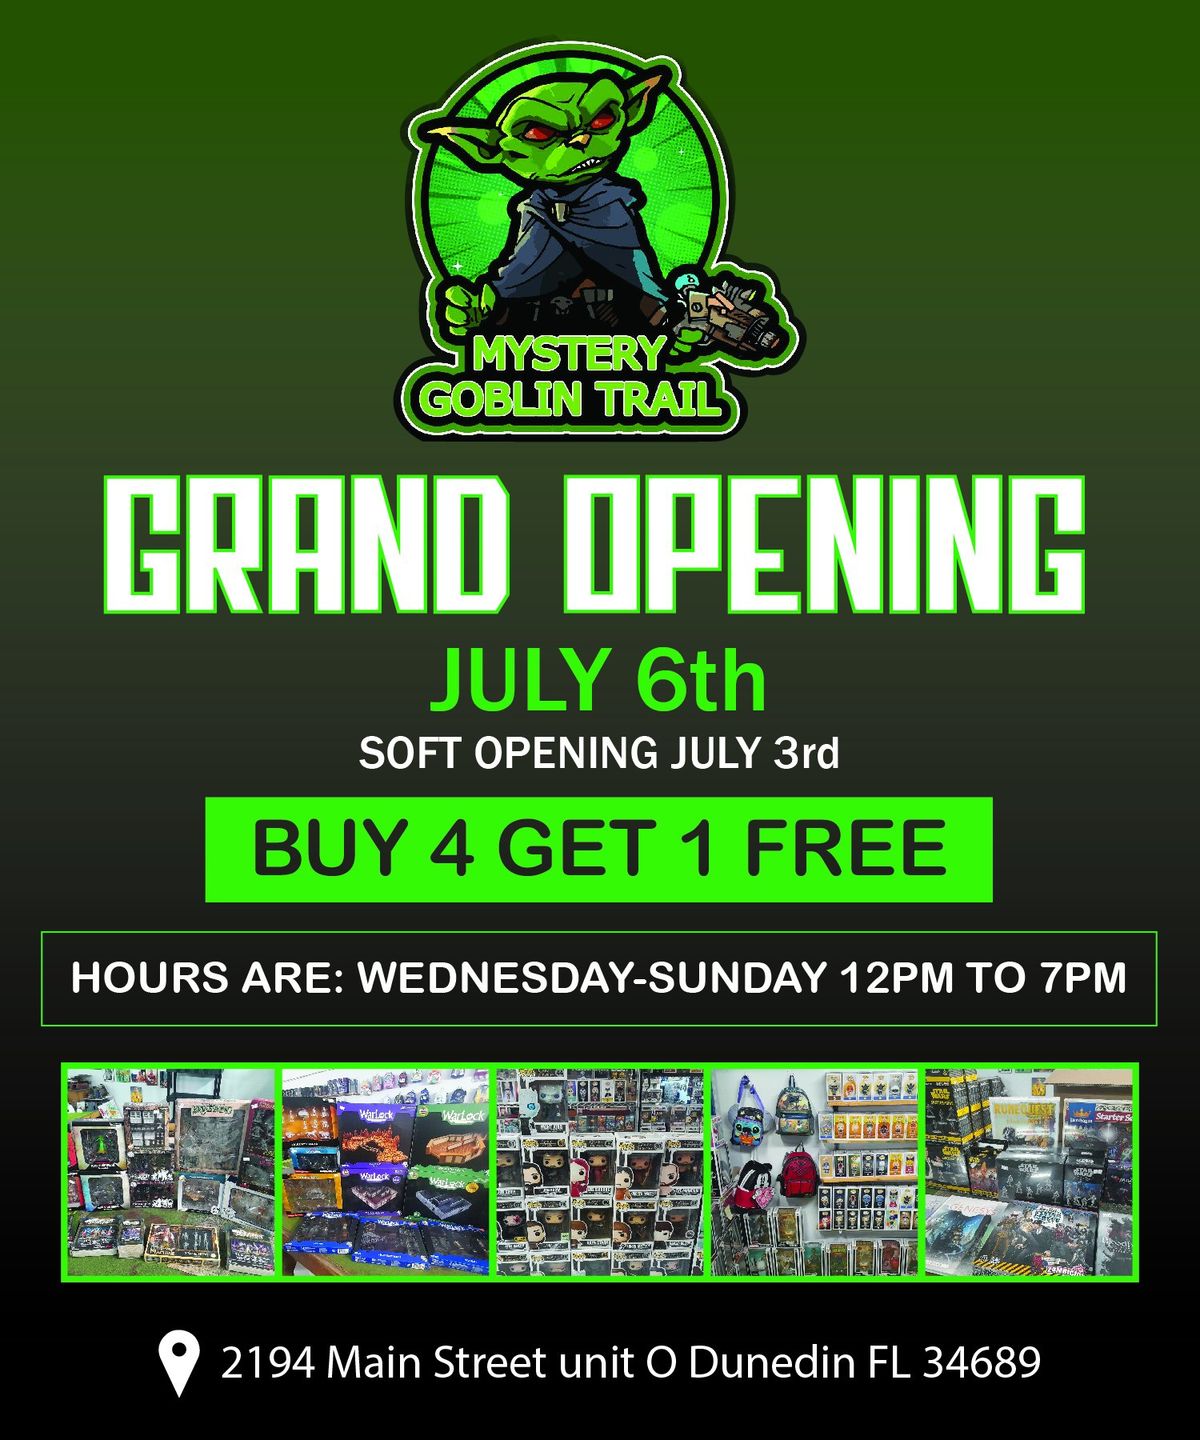 Big news From Mystery goblin trail July 6th grand opening